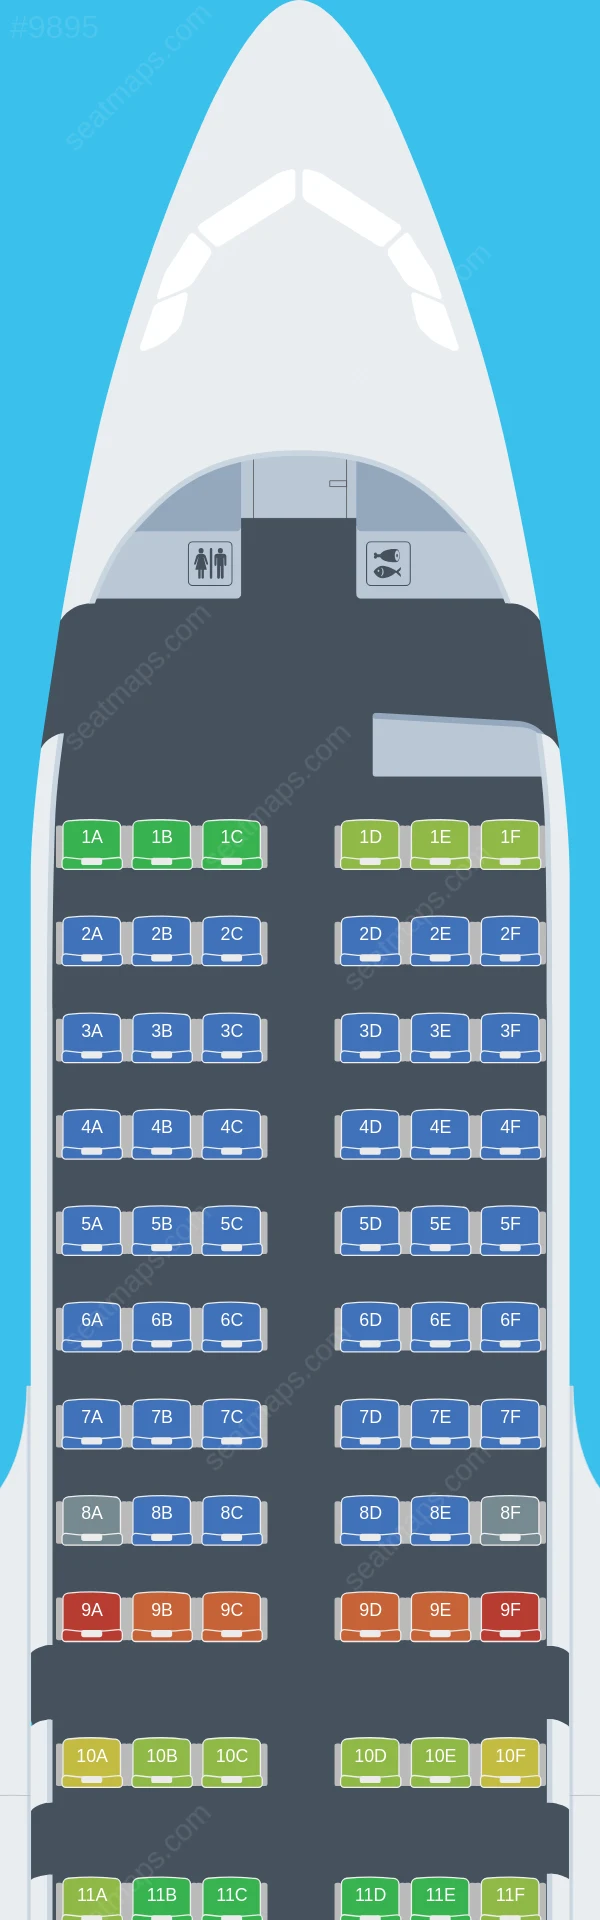 Hi Fly Malta Airbus A319-100 seatmap preview